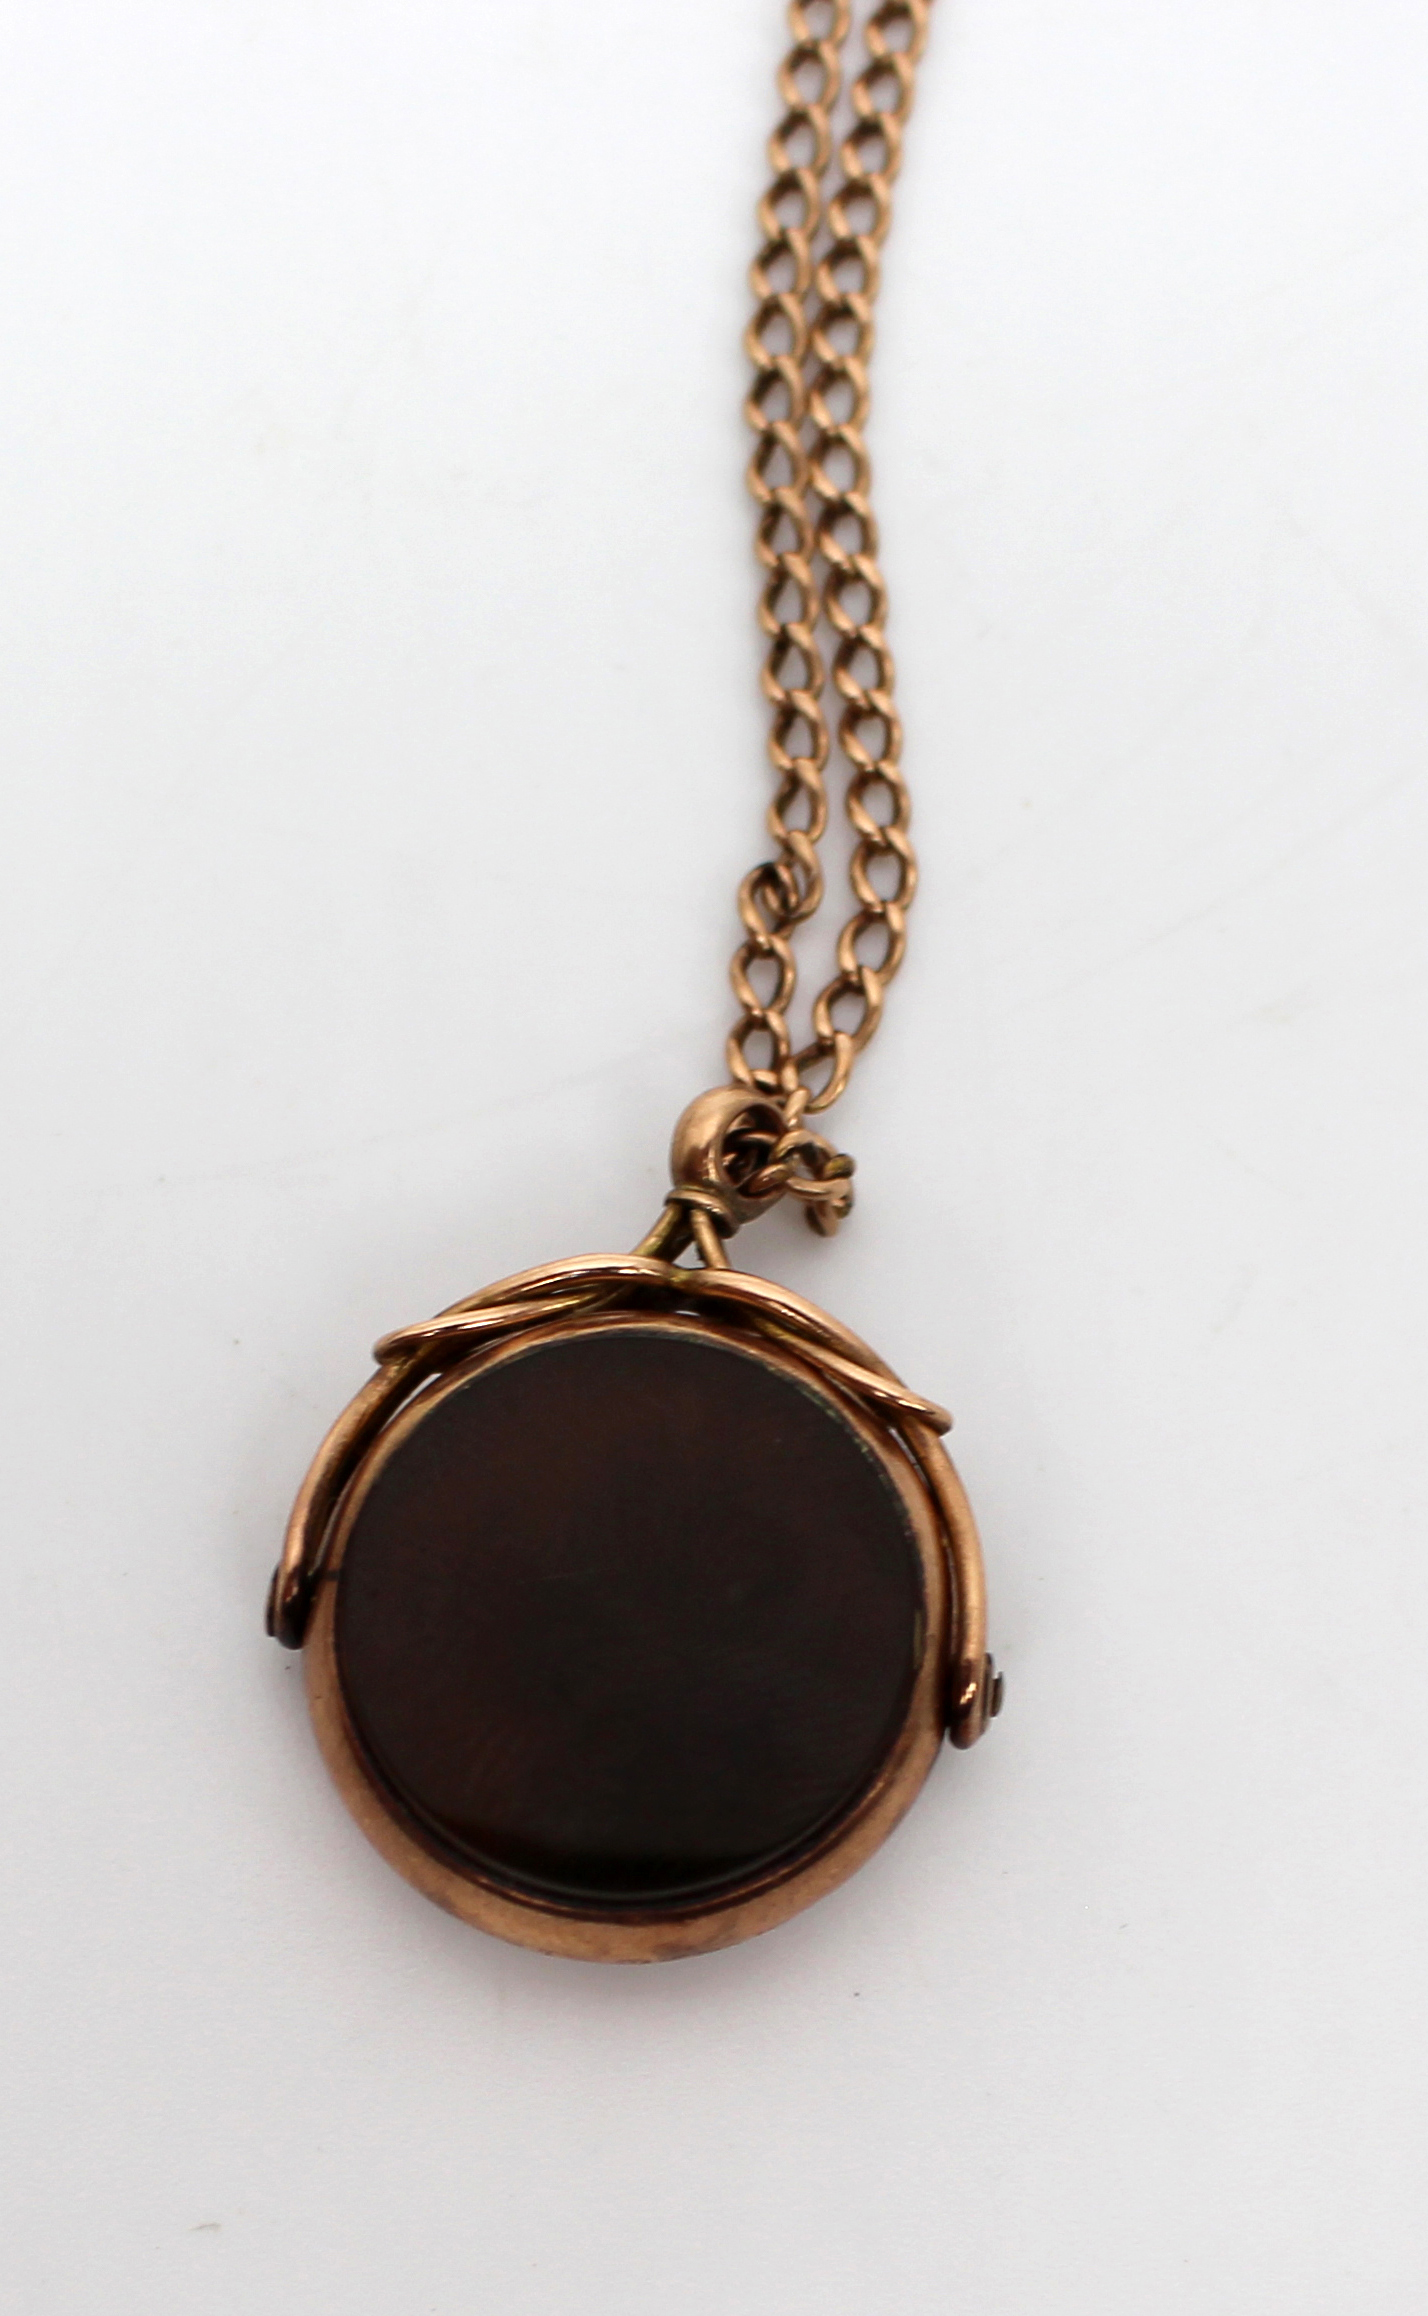 Agate Seal on Gold Chain - Image 2 of 3